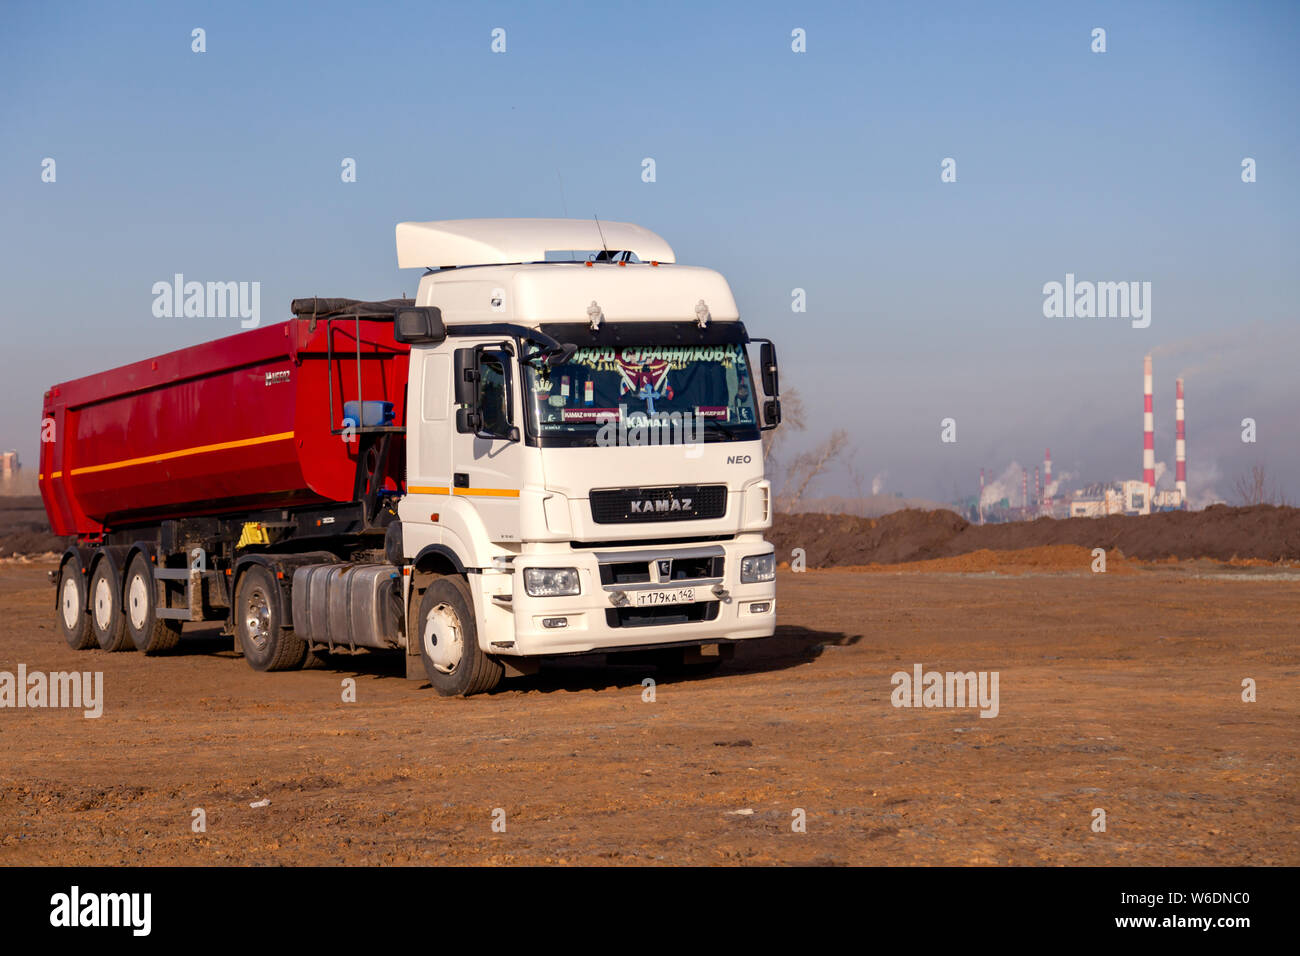 Russia Kemerovo 2019-04-09 red and white model Kamaz on field on background of the city landscape and factory pipes. Concept truck on Rally Dakar in d Stock Photo